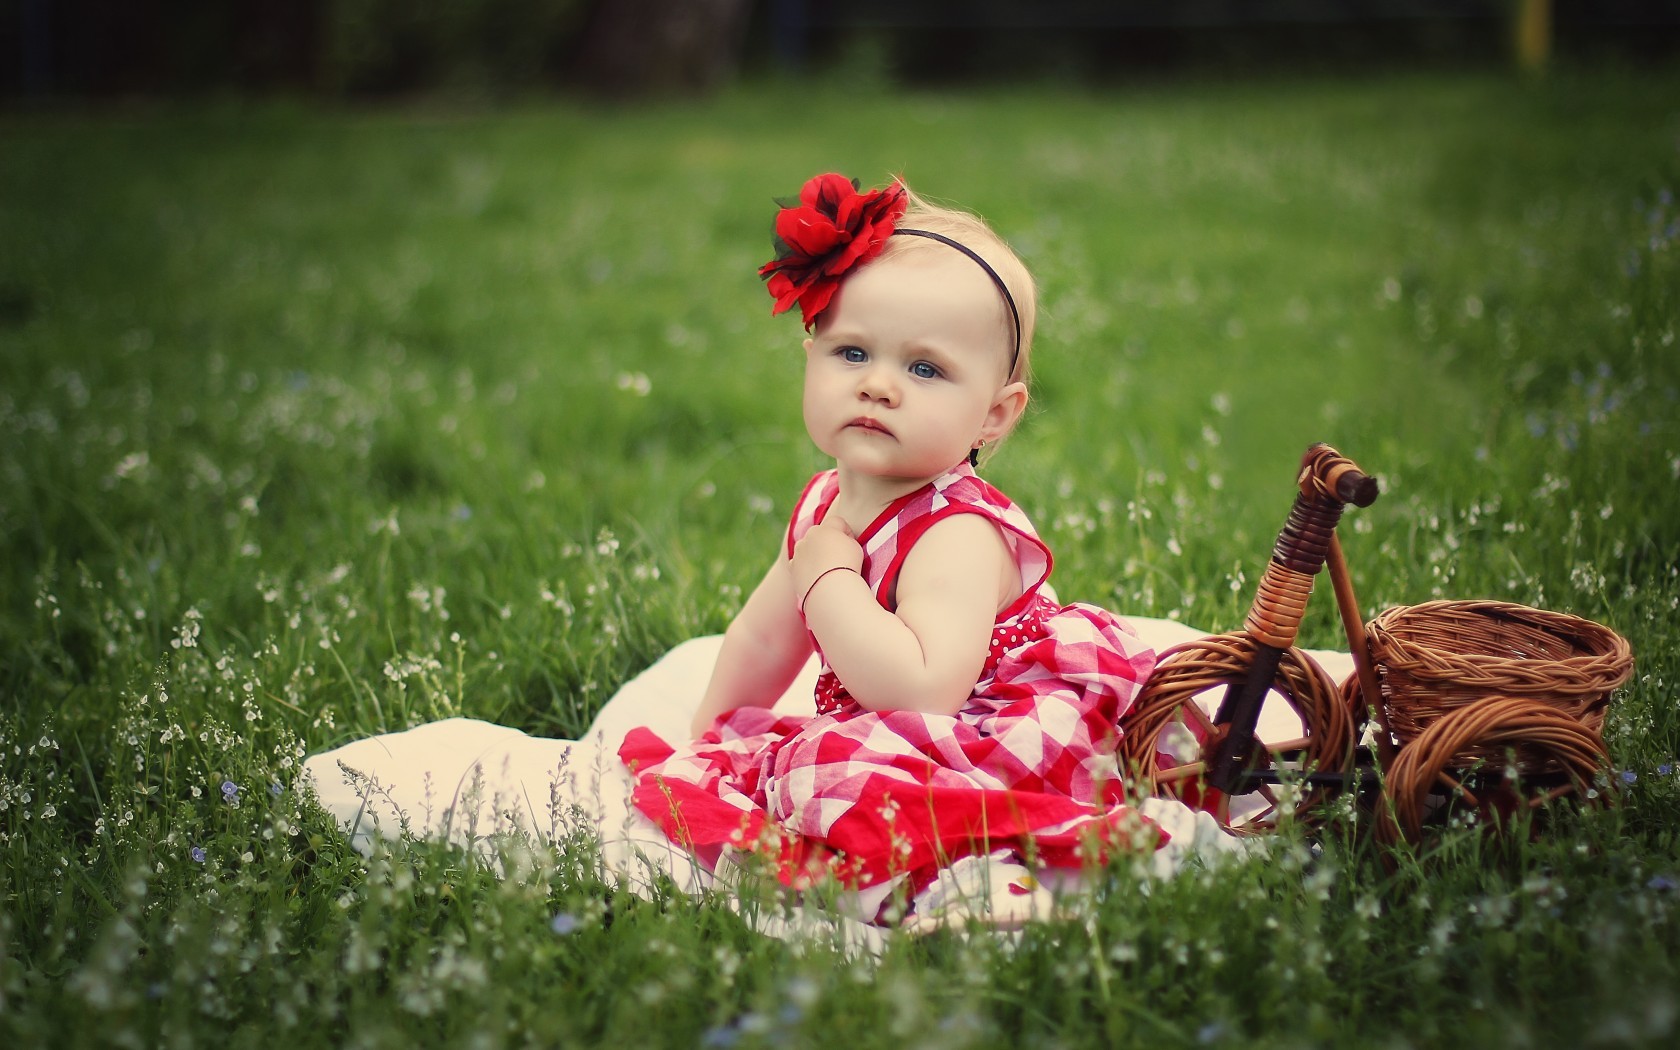 small kids wallpaper,people in nature,child,red,grass,skin